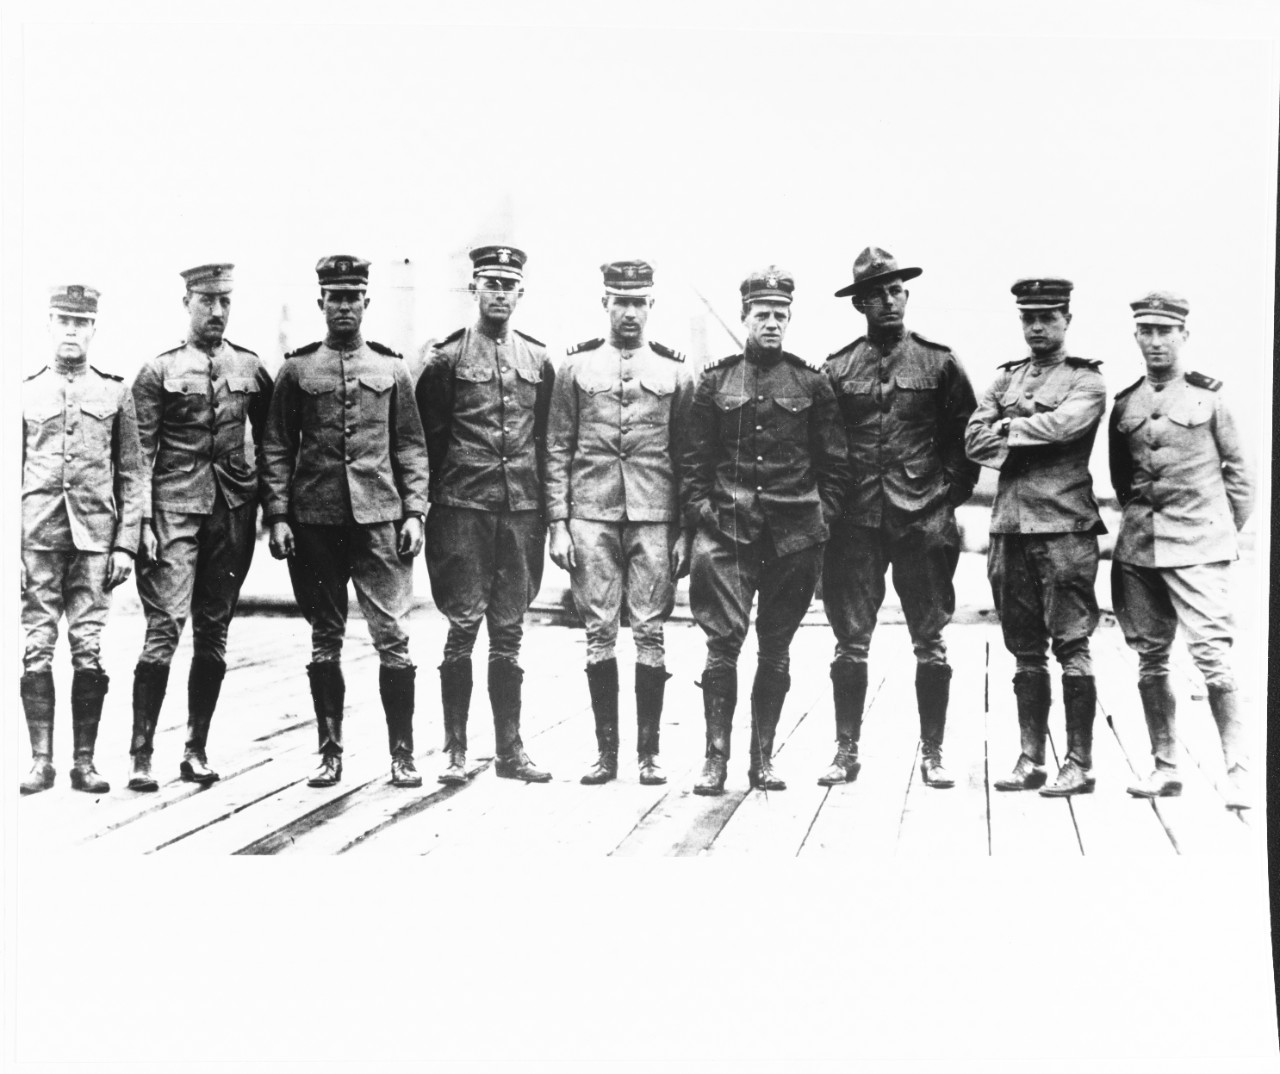 Commissioned officers of the Aviation Corps, at the Naval Aeronautic Station, Pensacola, Florida, March 1914.